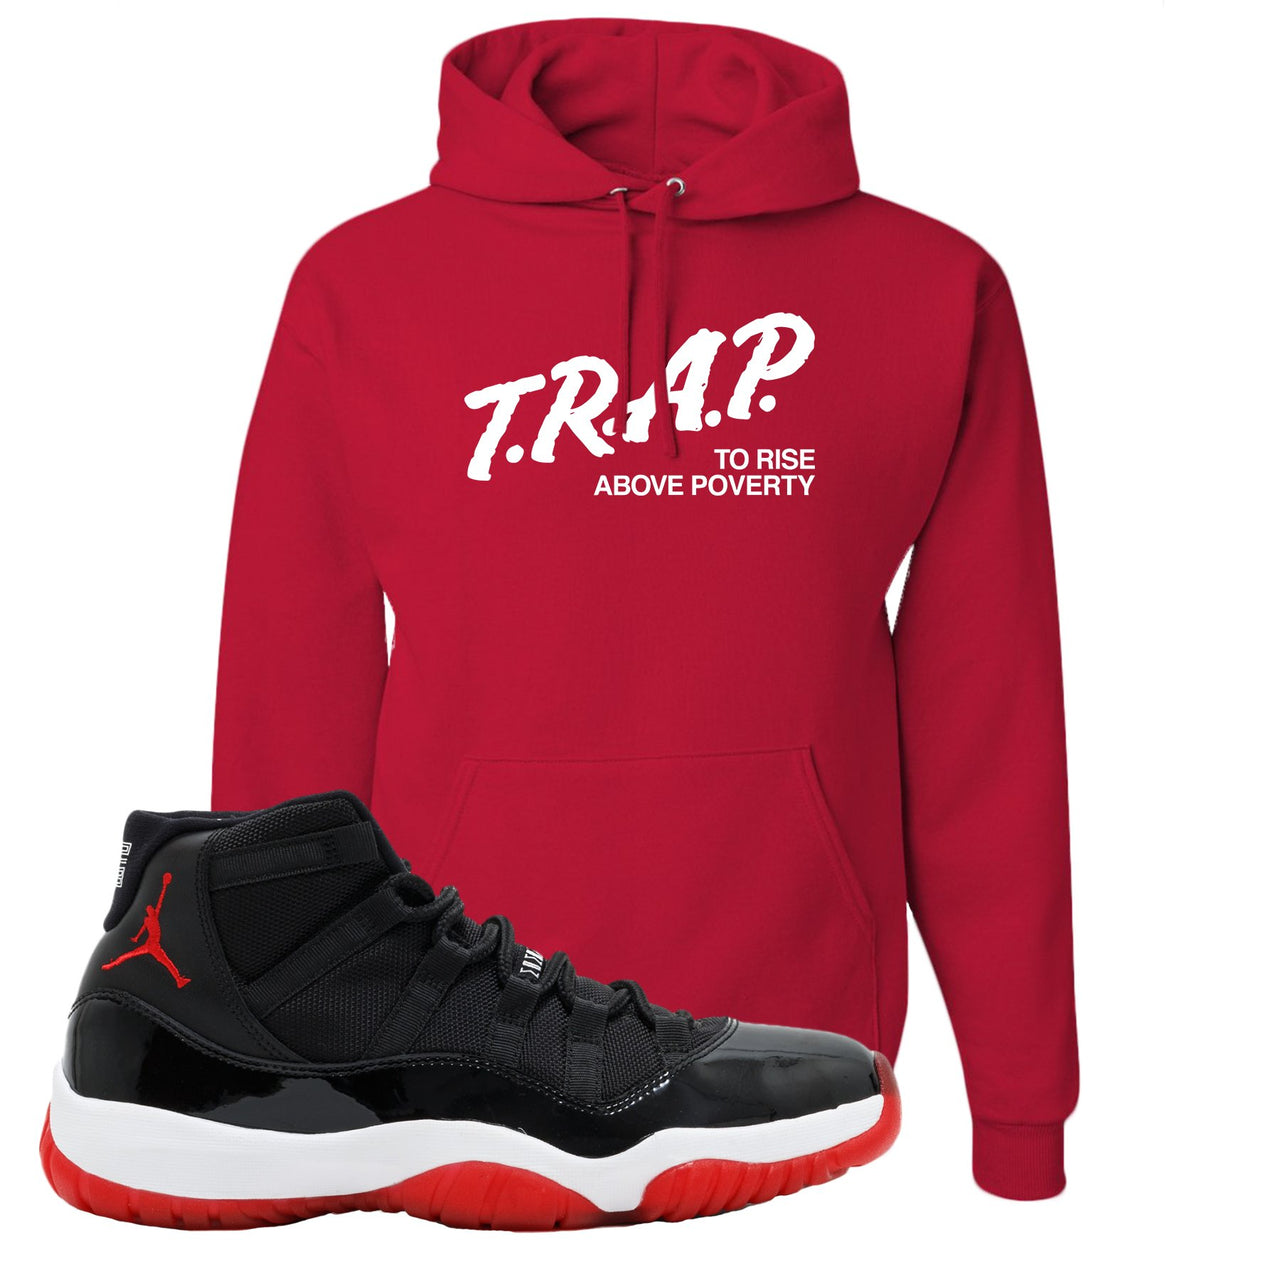 Jordan 11 Bred Trap To Rise Above Poverty Red Sneaker Hook Up Pullover Hoodie